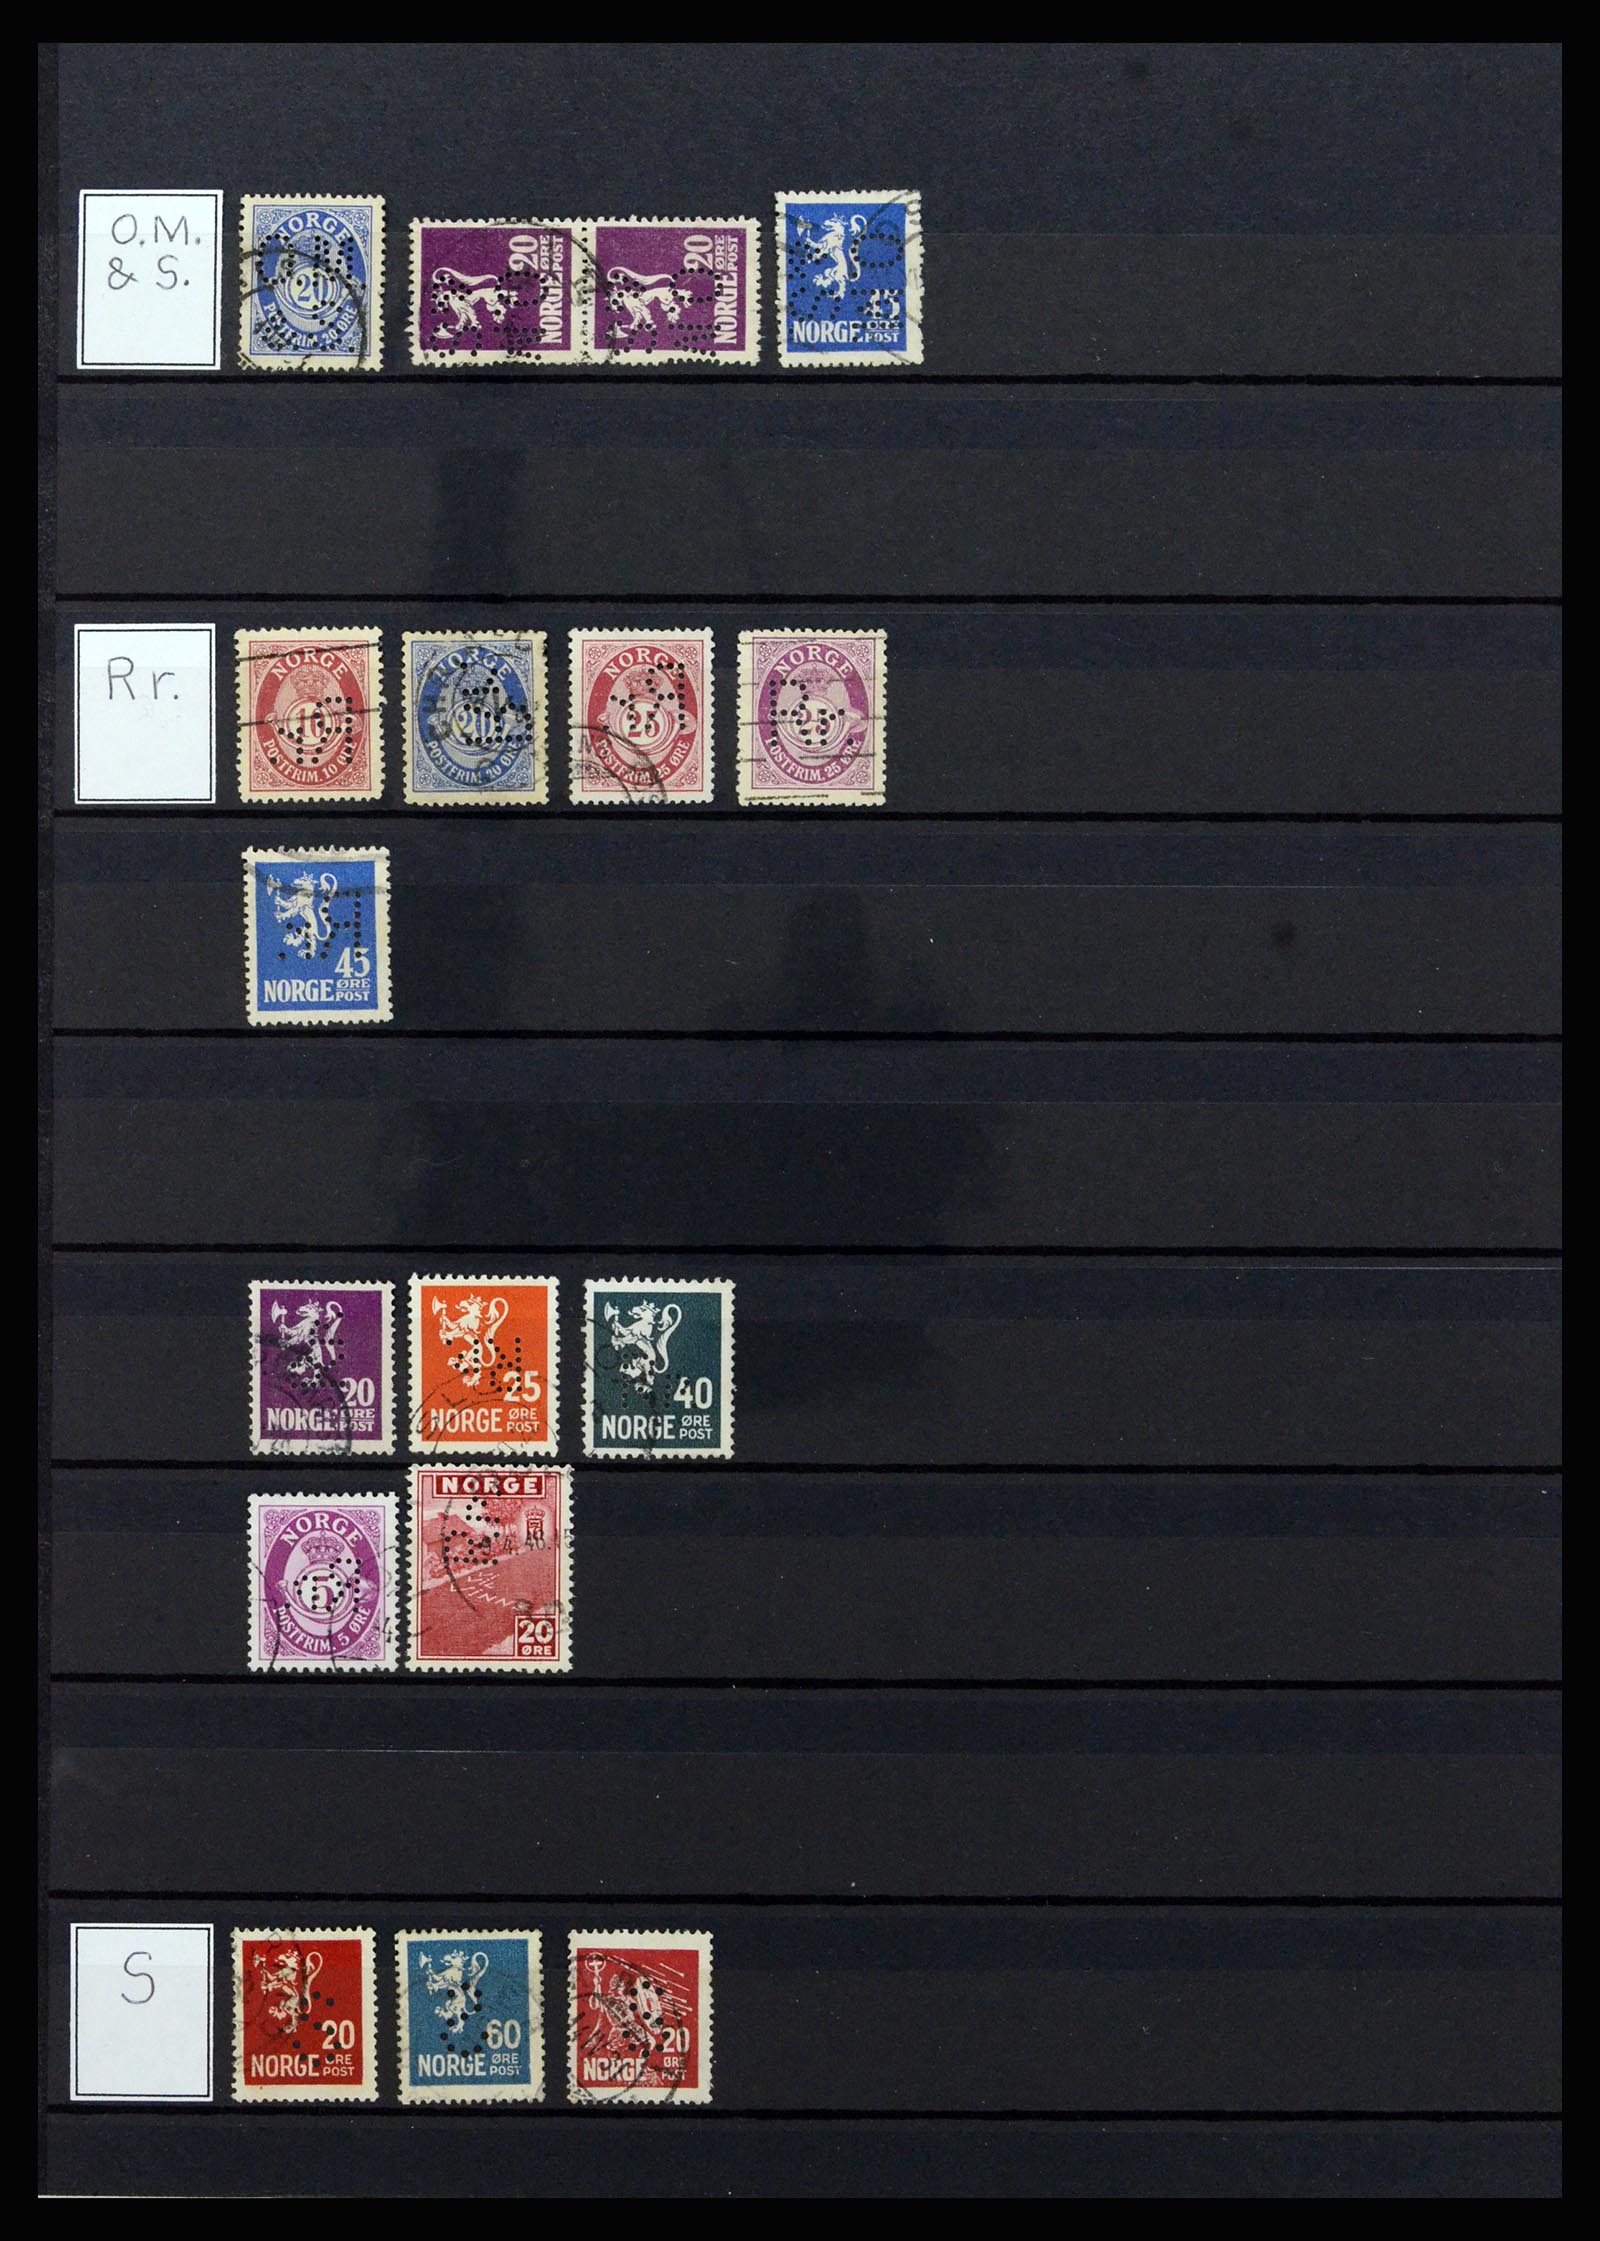 37057 081 - Stamp collection 37057 World perfins 1880-1950.